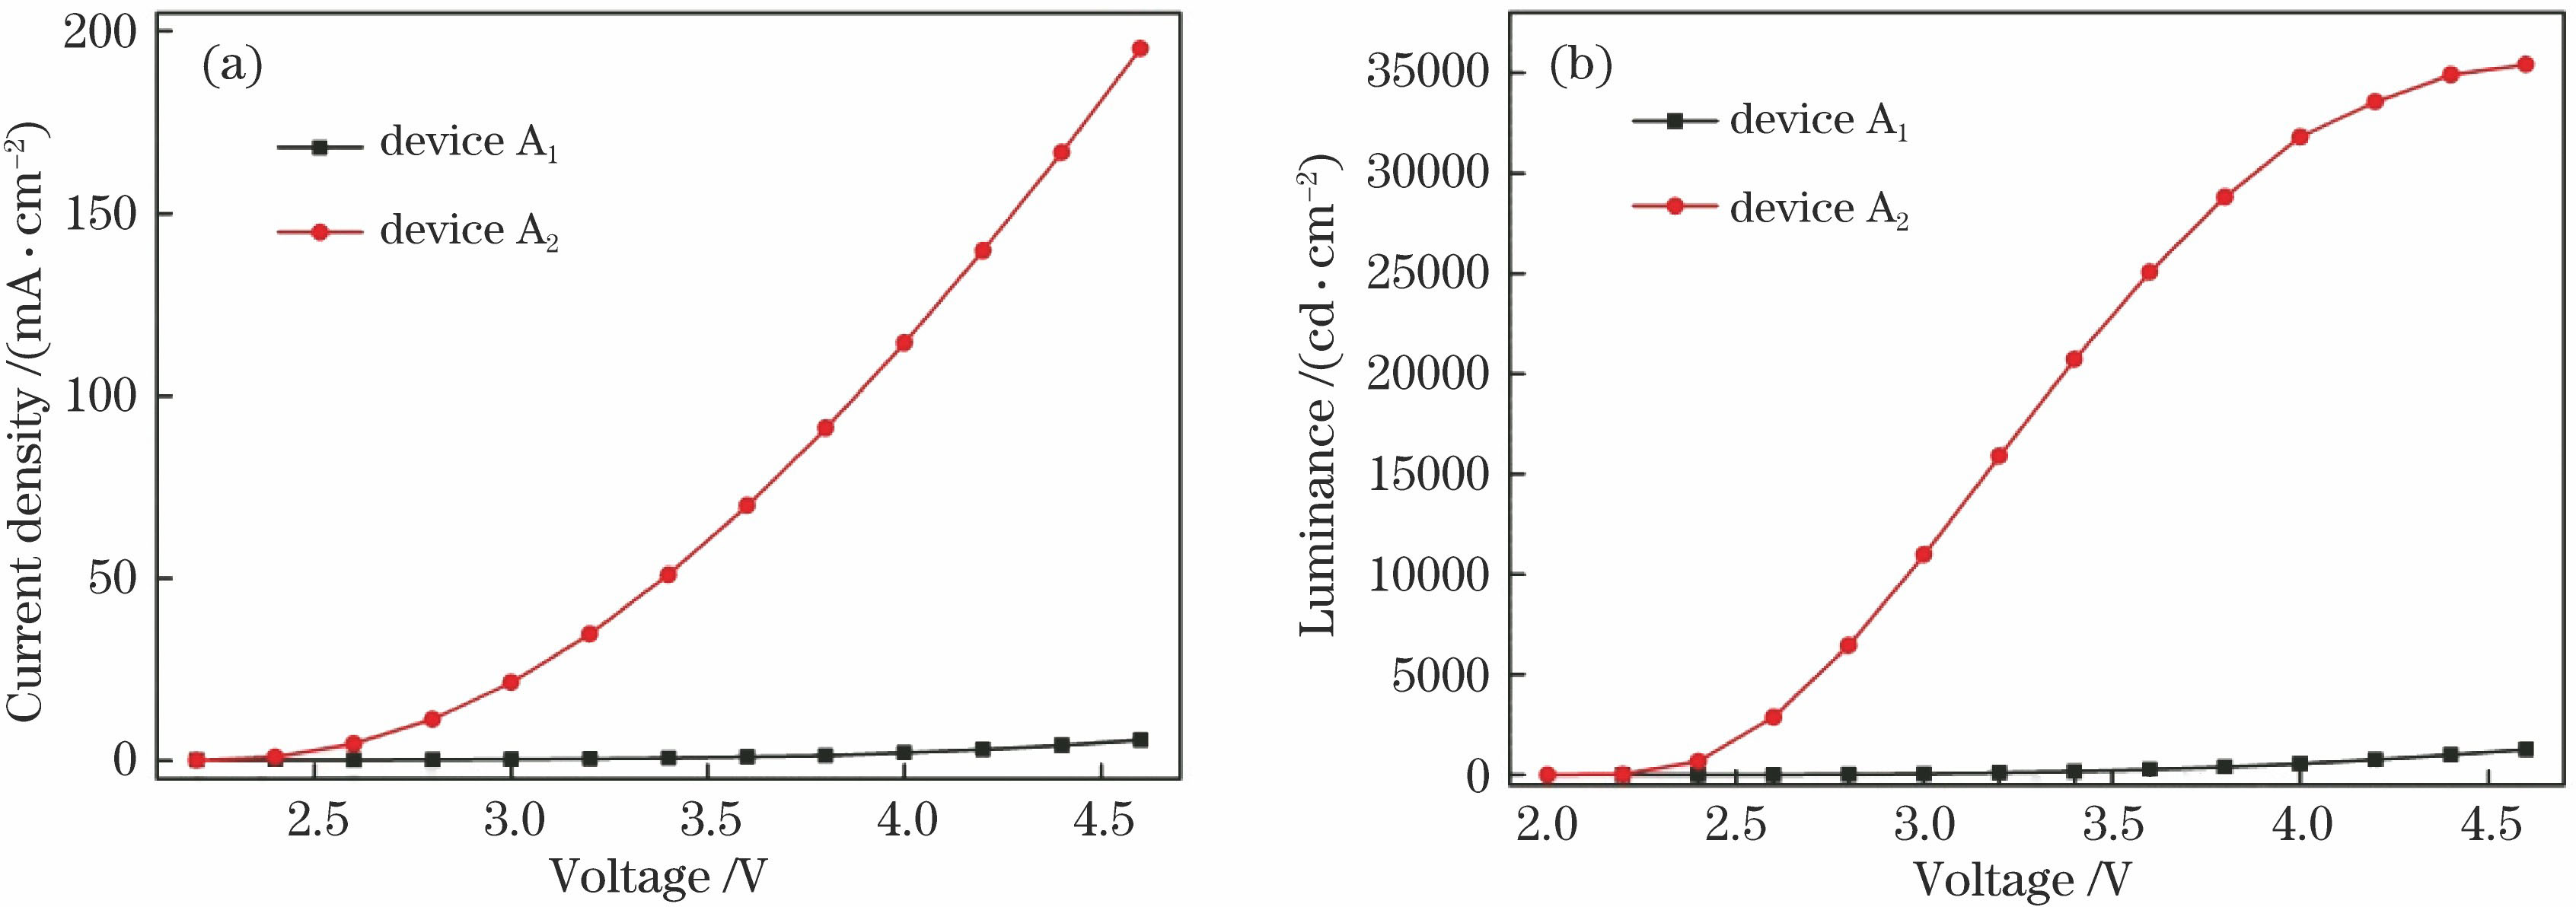 Characteristic curves of device A1 and device A2. (a) Current density versus voltage; (b) luminance versus voltage